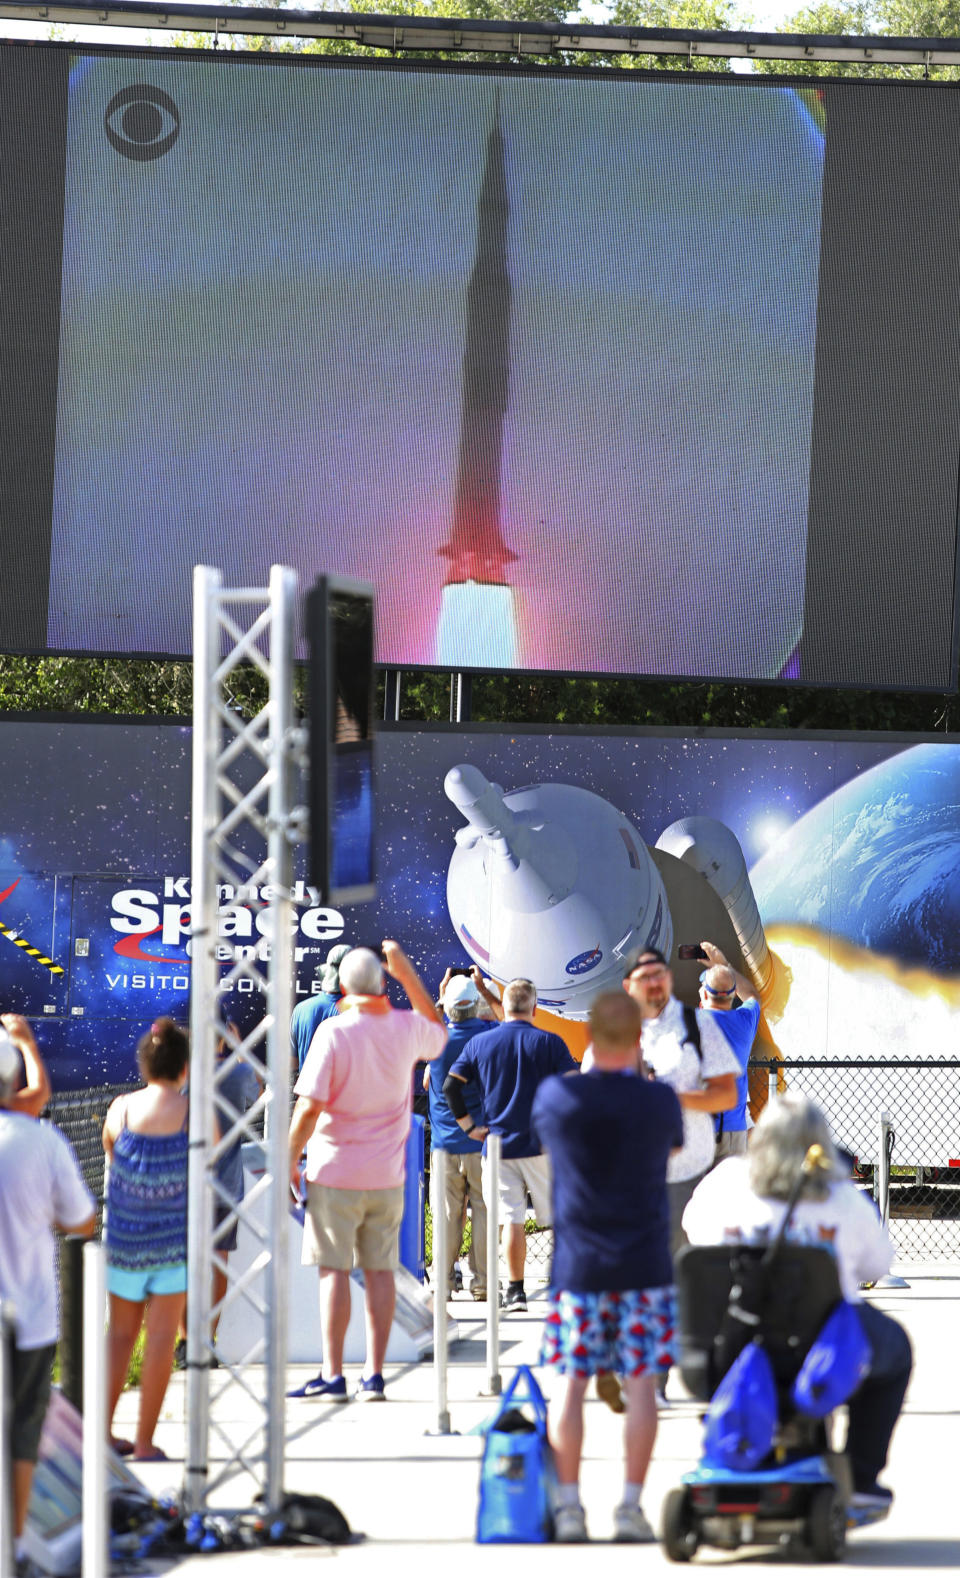 People watch lift-off during the Apollo 11 Launch Flashback, broadcast by CBS at the Kennedy Space Center's Apollo/Saturn V exhibit, Tuesday July 16, 2019. Guests viewed a rebroadcast of the 1969 launch from the grandstands at the Banana Creek viewing area to commemorate the launch of the Saturn V rocket and the Apollo 11 crew 50 years ago. (Joe Burbank/Orlando Sentinel via AP)